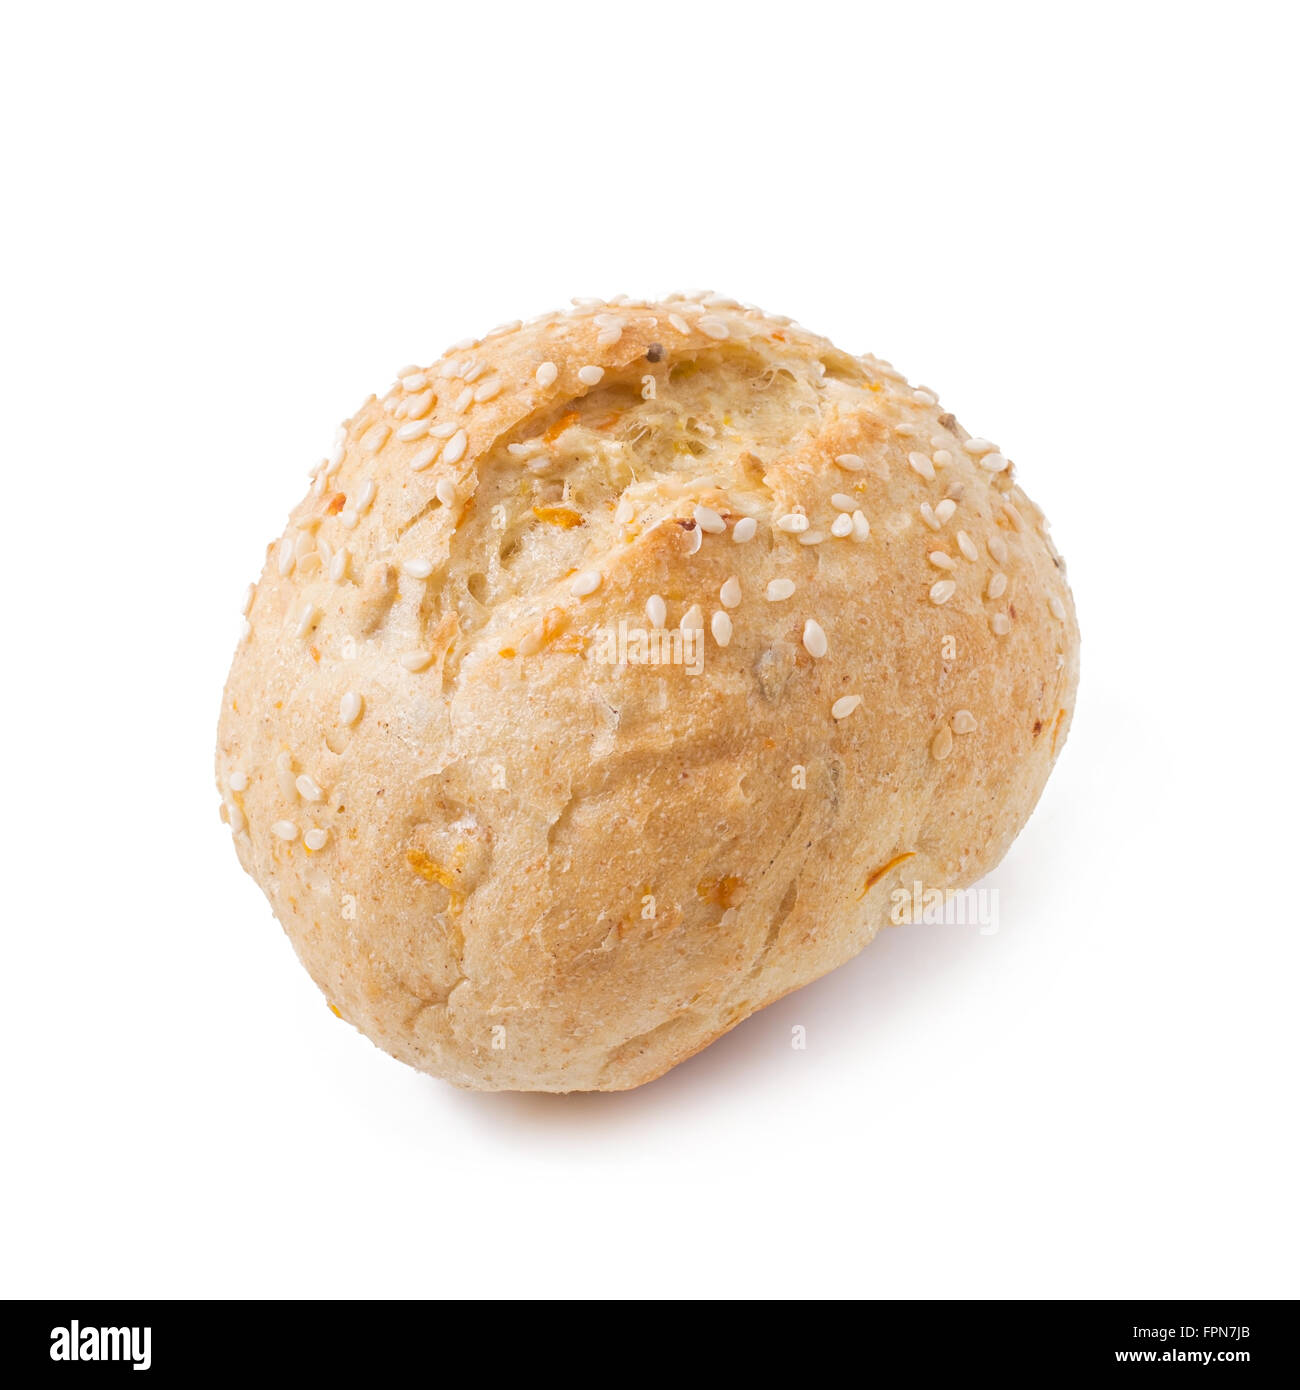 Small dietary grain bun with bran isolated on a white background Stock Photo